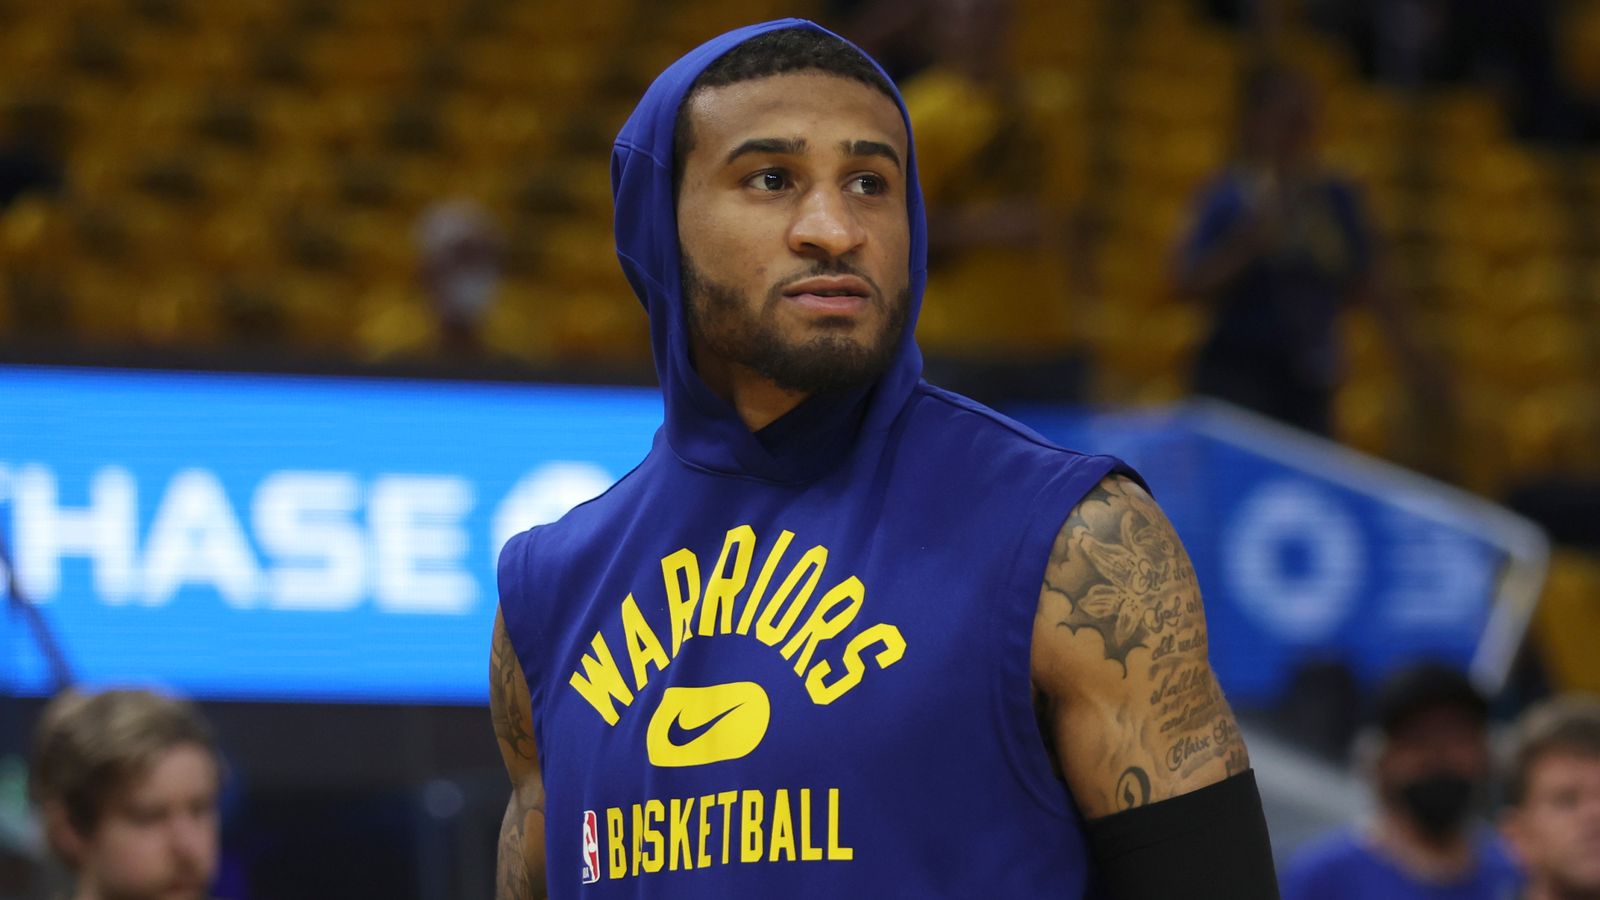 Gary Payton II ‘ready to go’ for Warriors ahead of Game 1